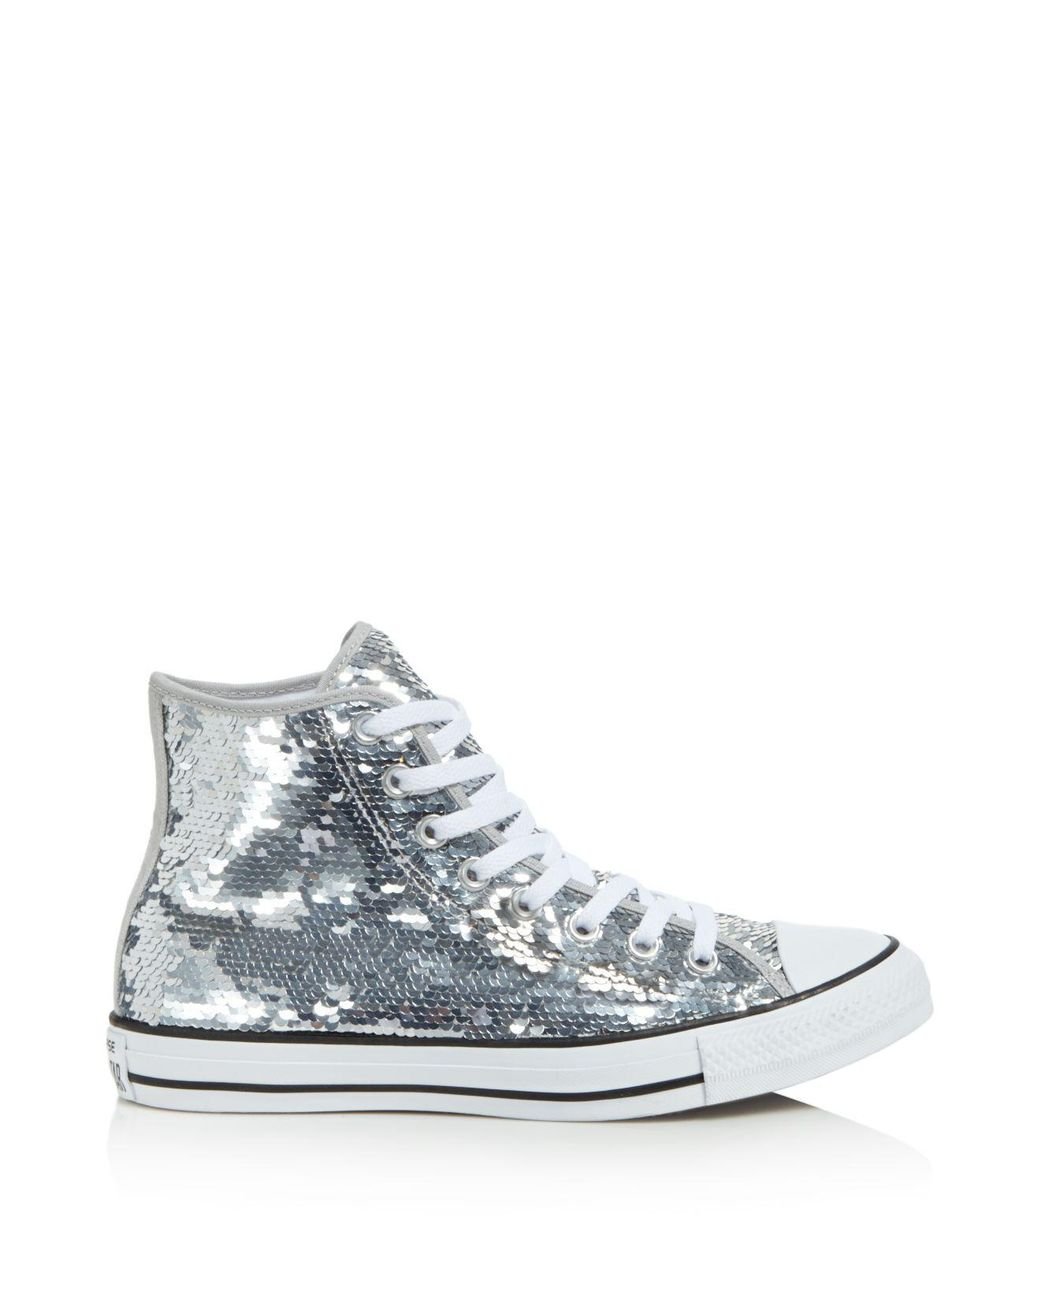 Red Sequin High Top Converse Factory Clearance, 43% OFF | irradia.com.es